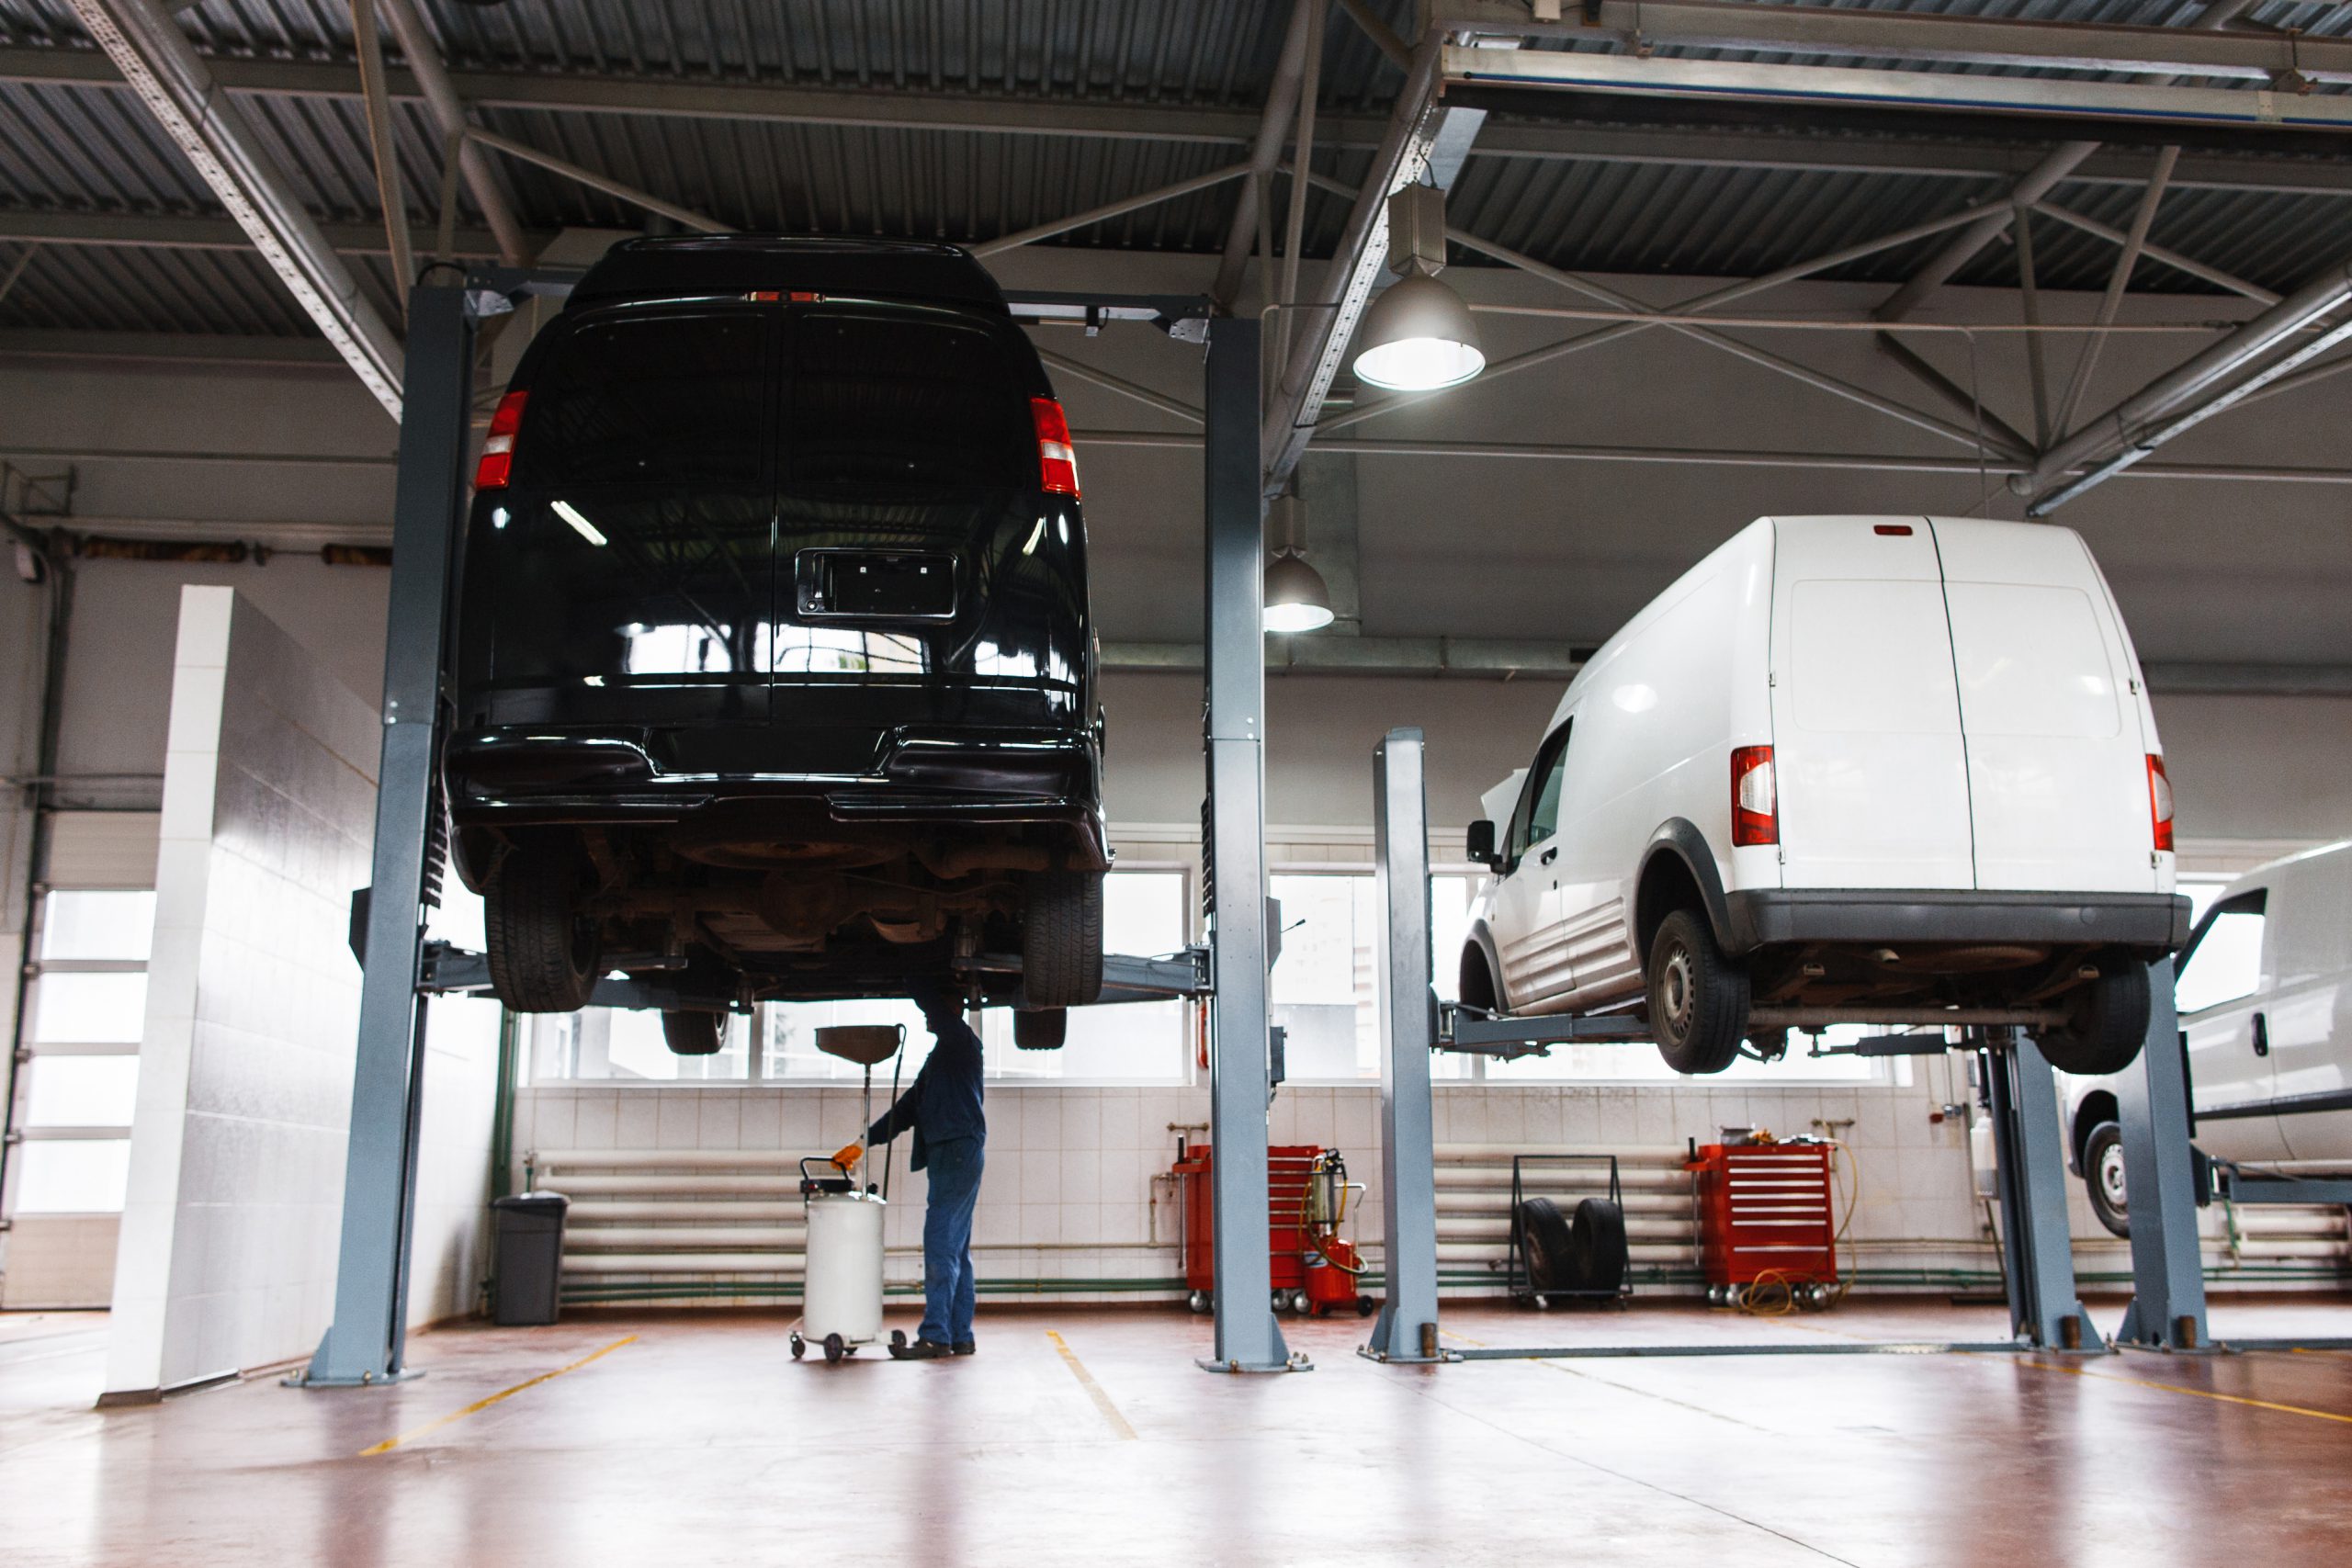 Auto service maintenance for minibuses, modern workshop for car repairing